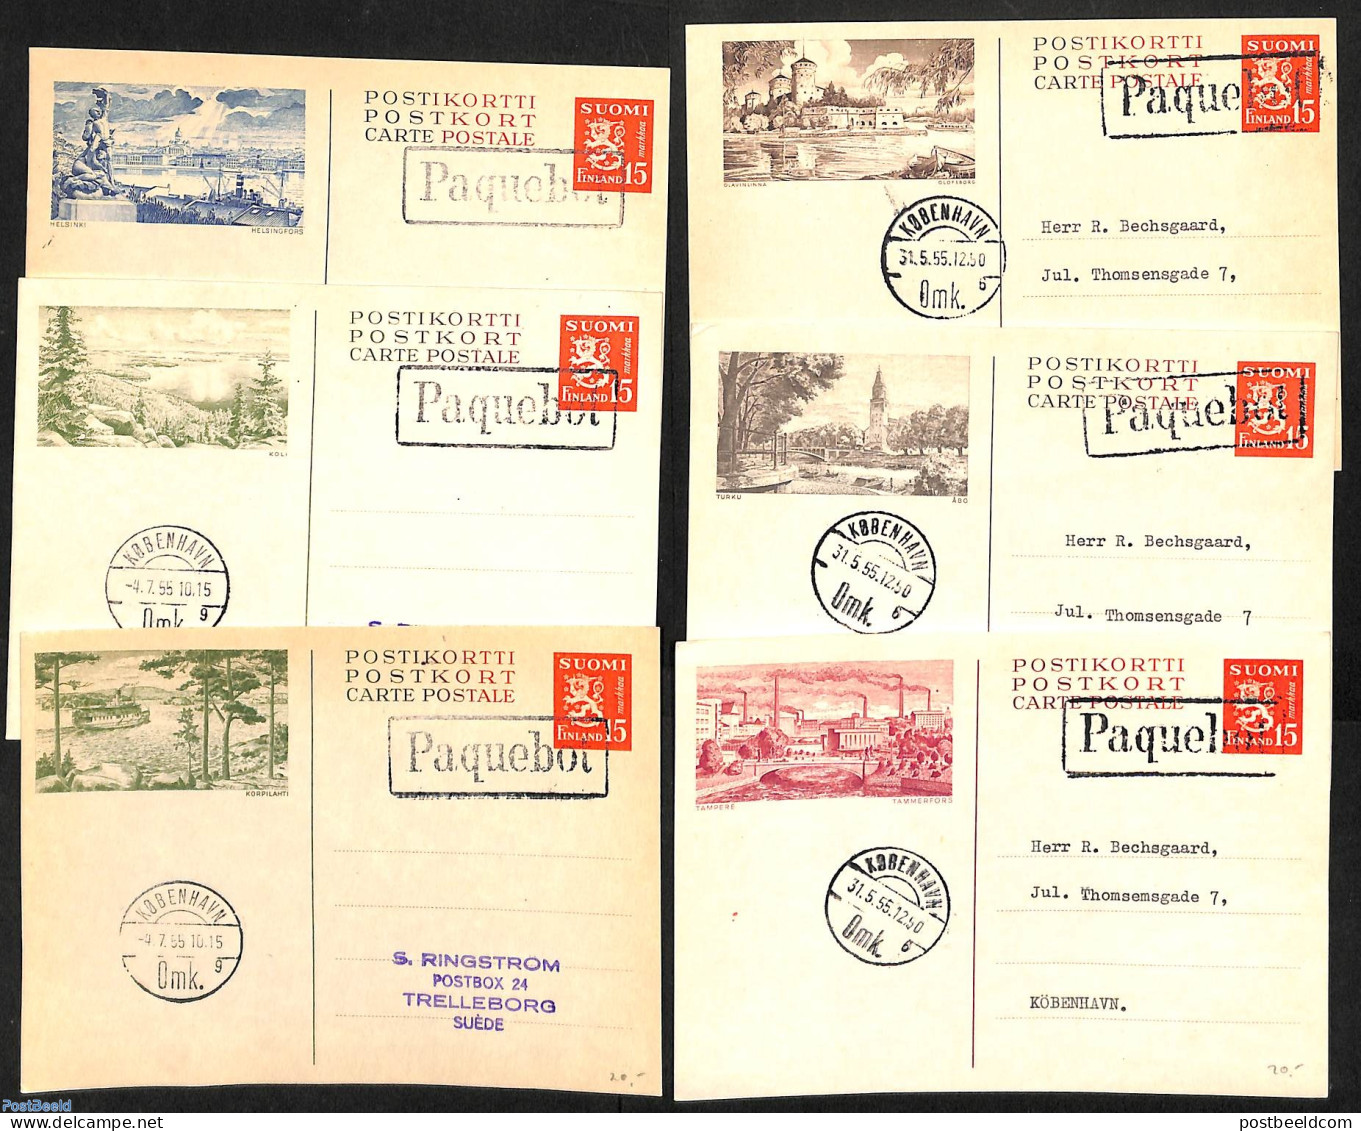 Finland 1952 6 Illustrated Postcards, Used Postal Stationary - Covers & Documents